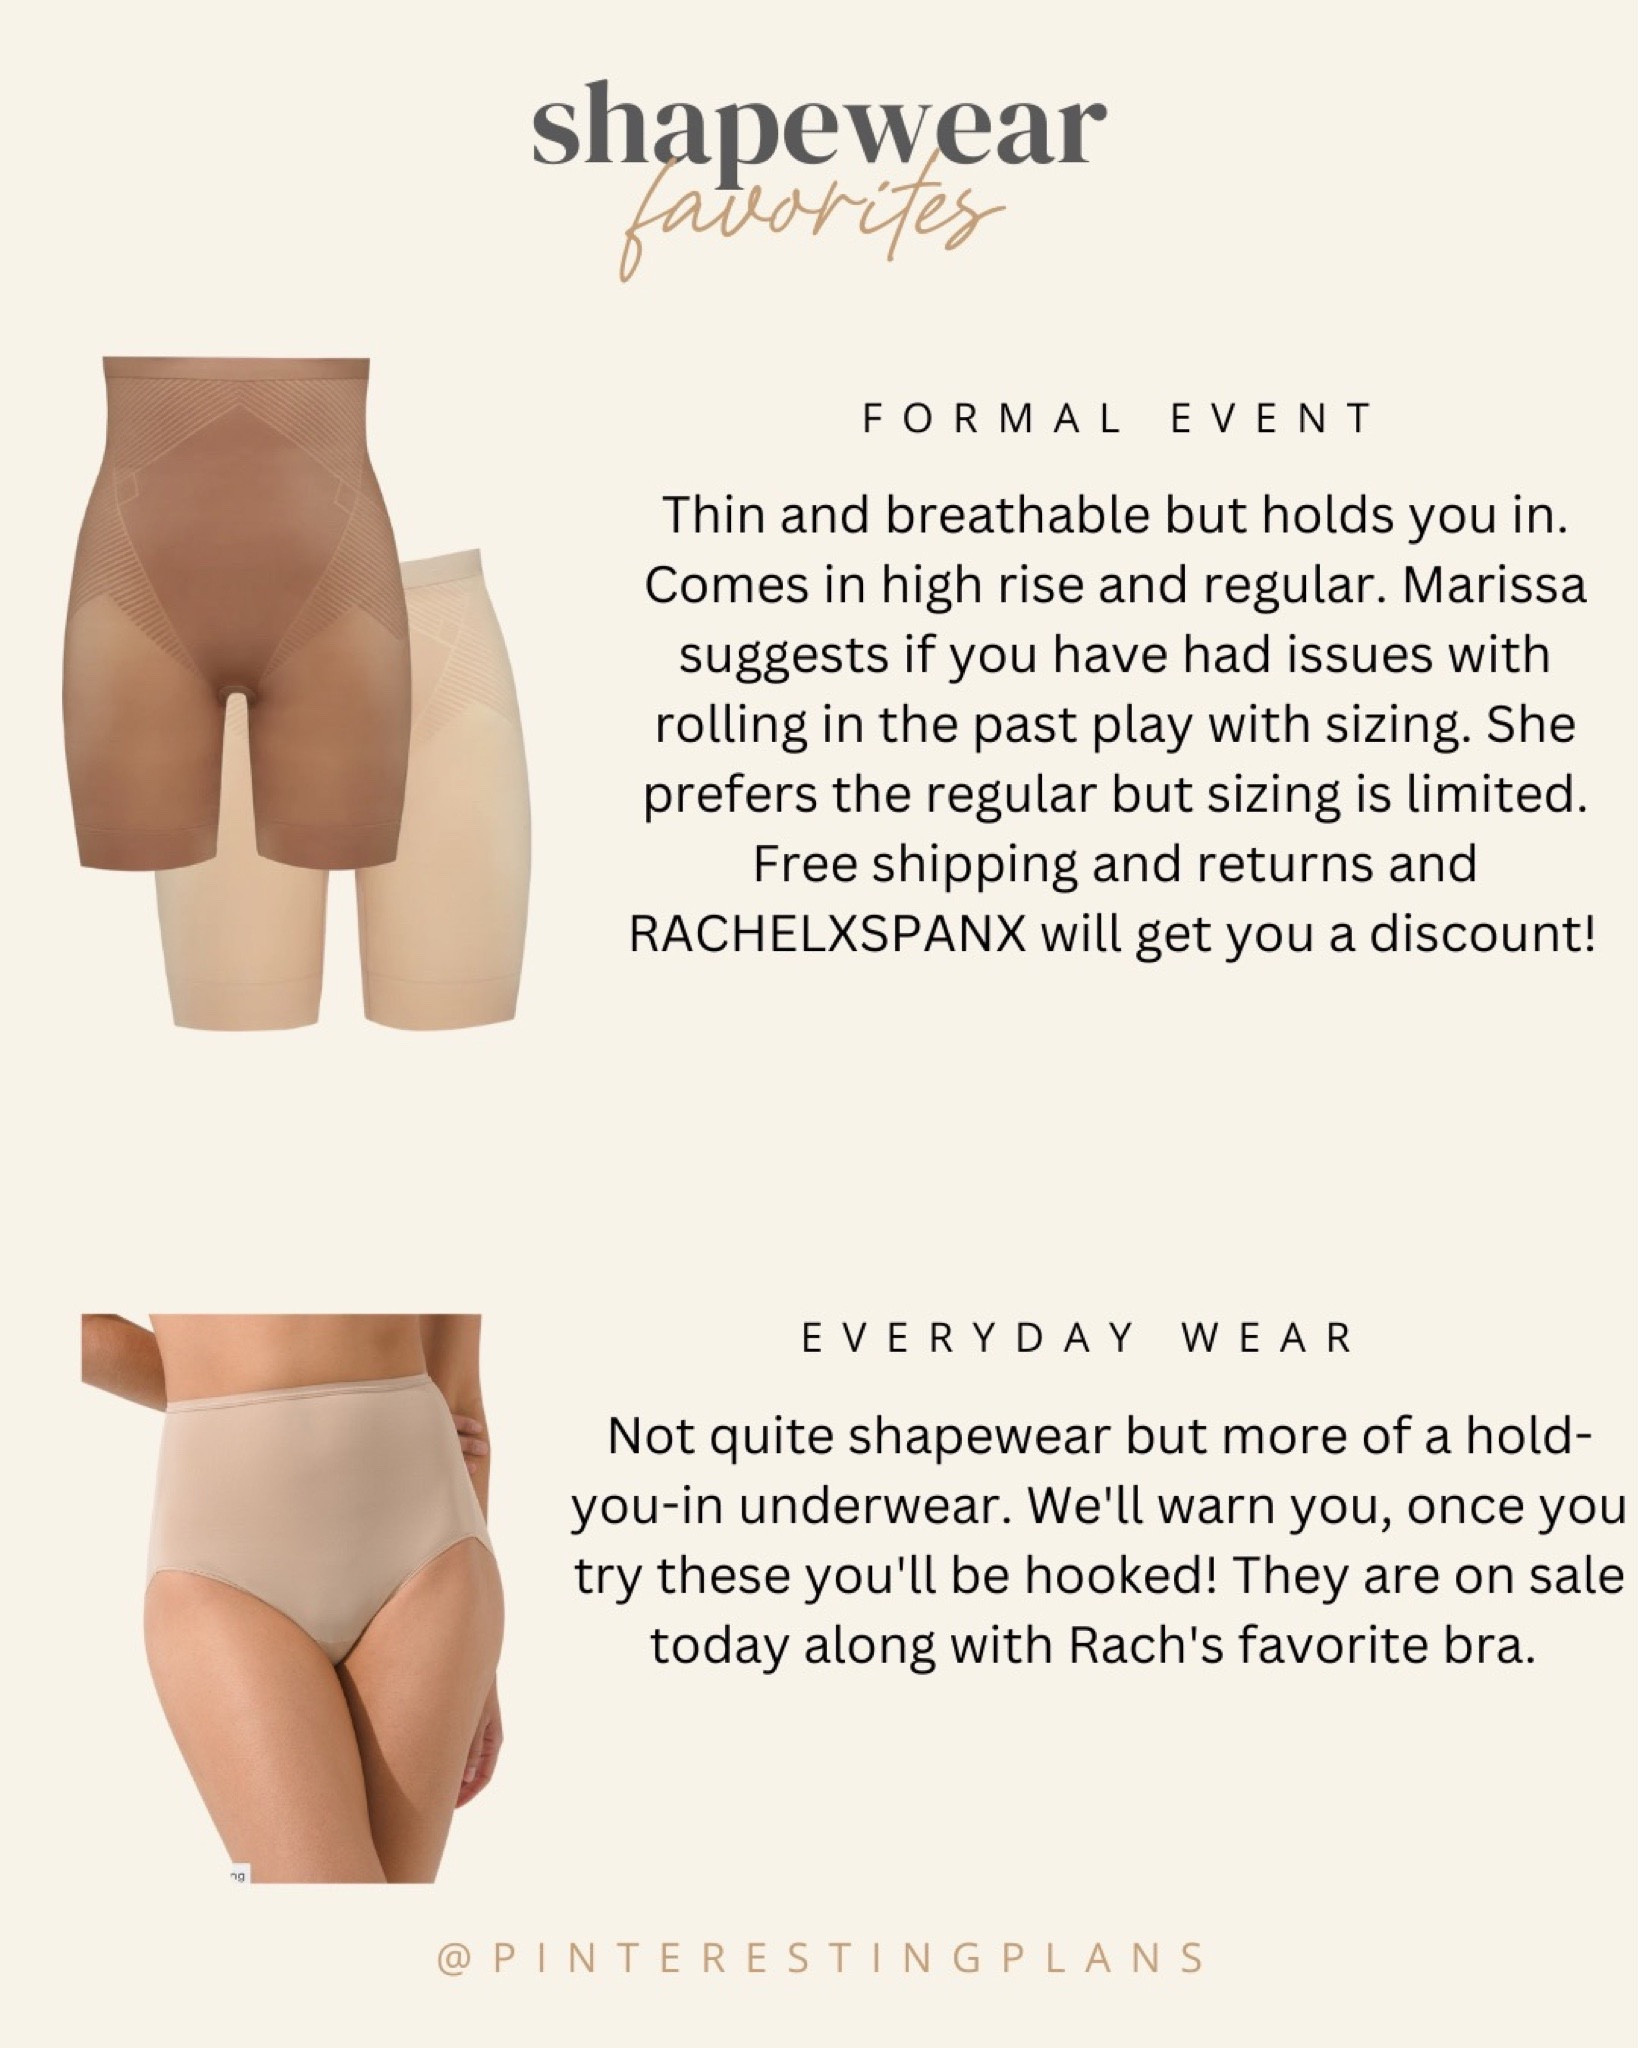 Thinstincts® 2.0 High-Waisted … curated on LTK